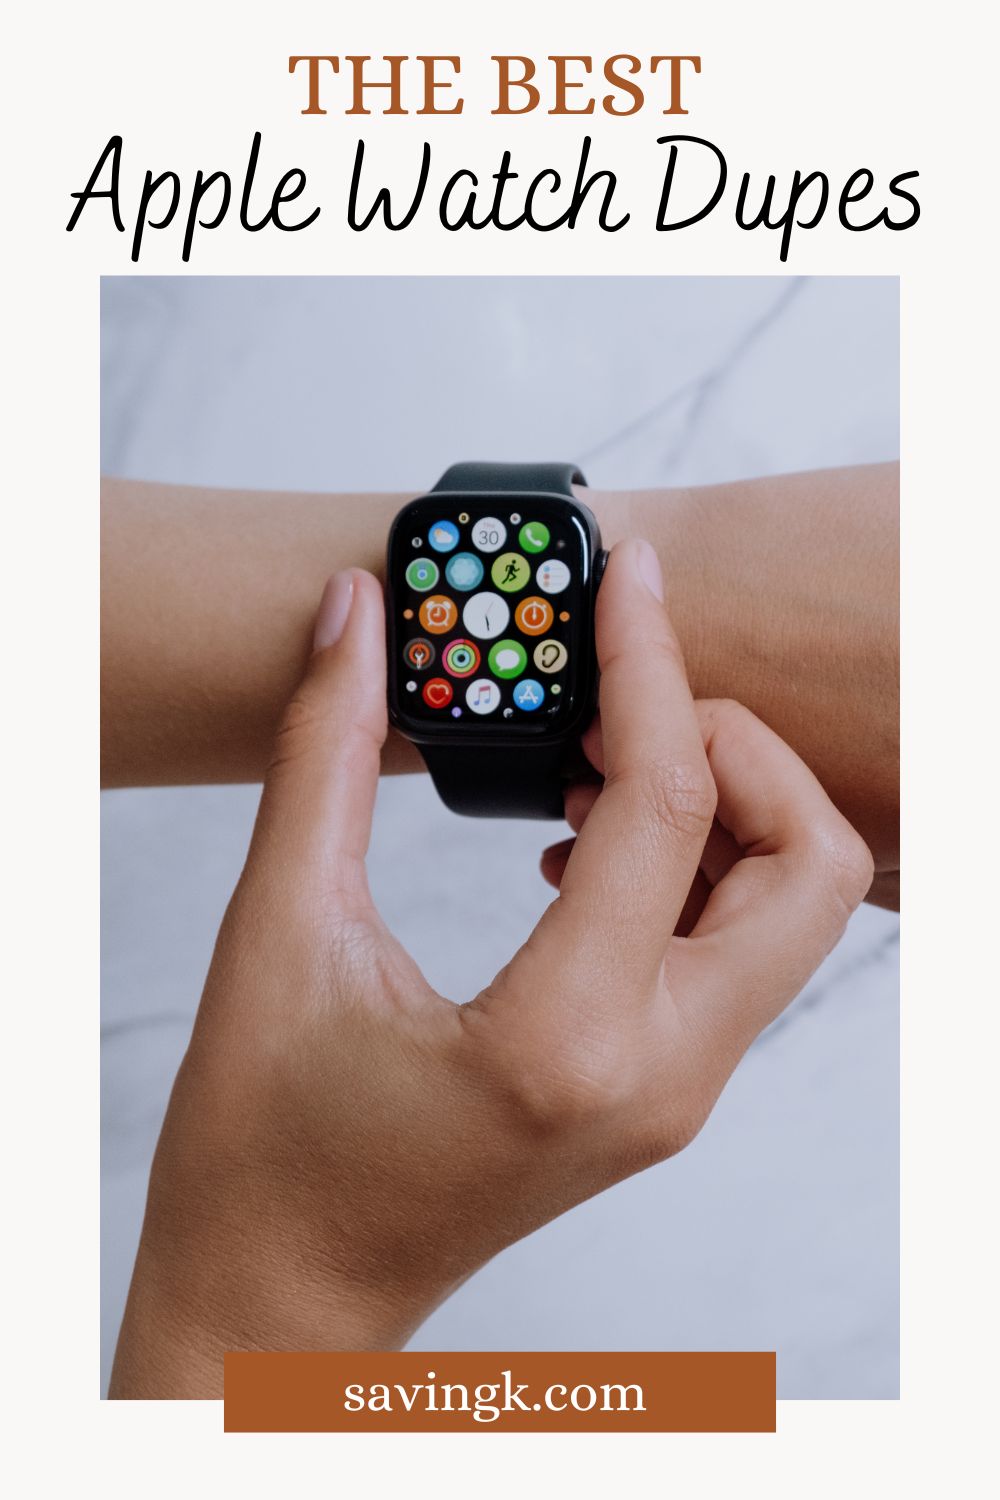 Apple Watch Dupe